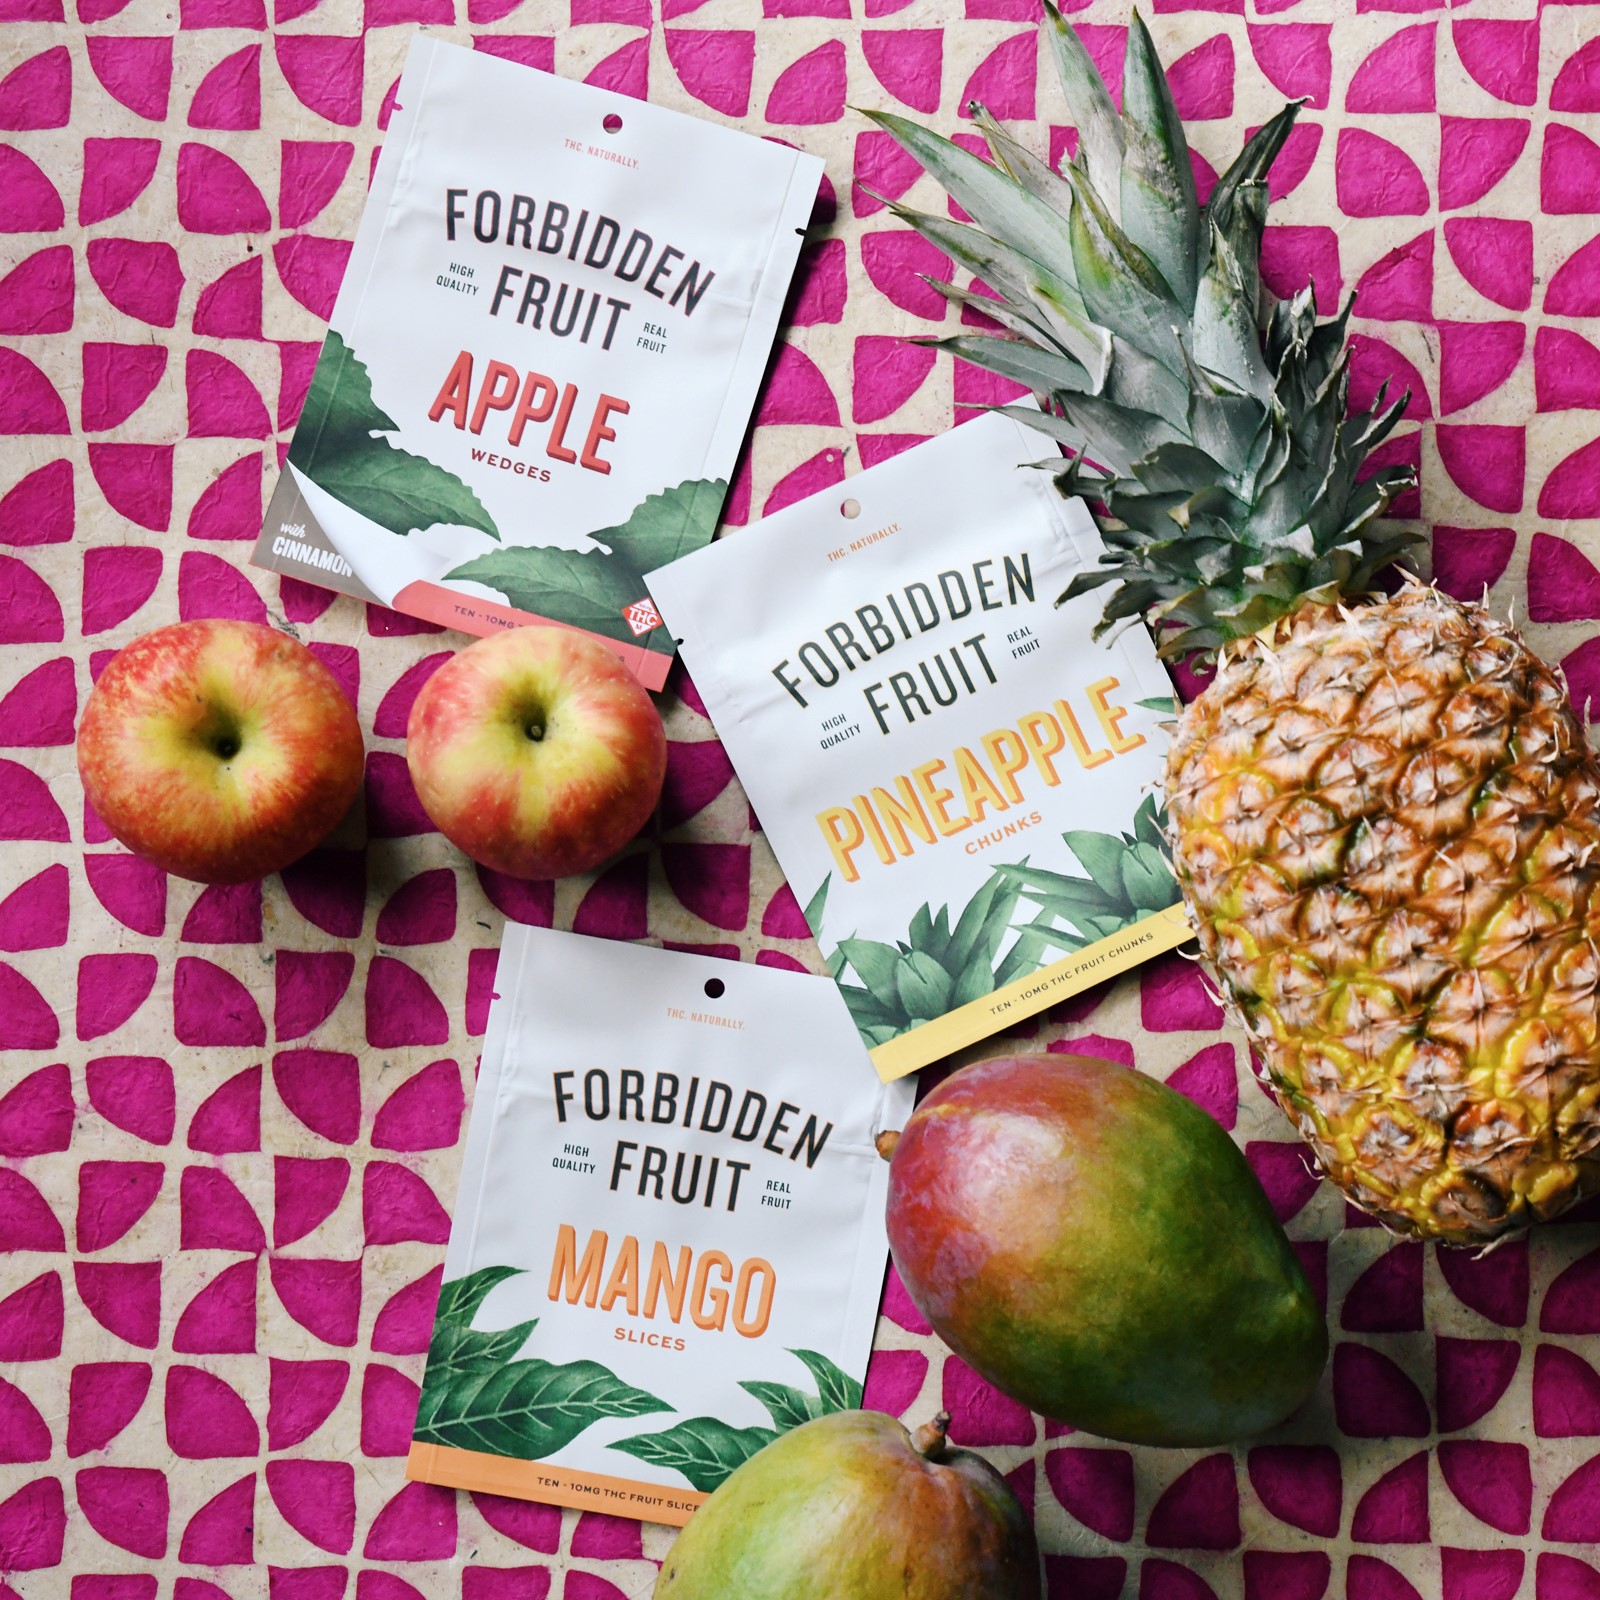 Forbidden Fruit by CLOVR in 3 flavors: Cinnamon Apple, Pineapple, and Mango